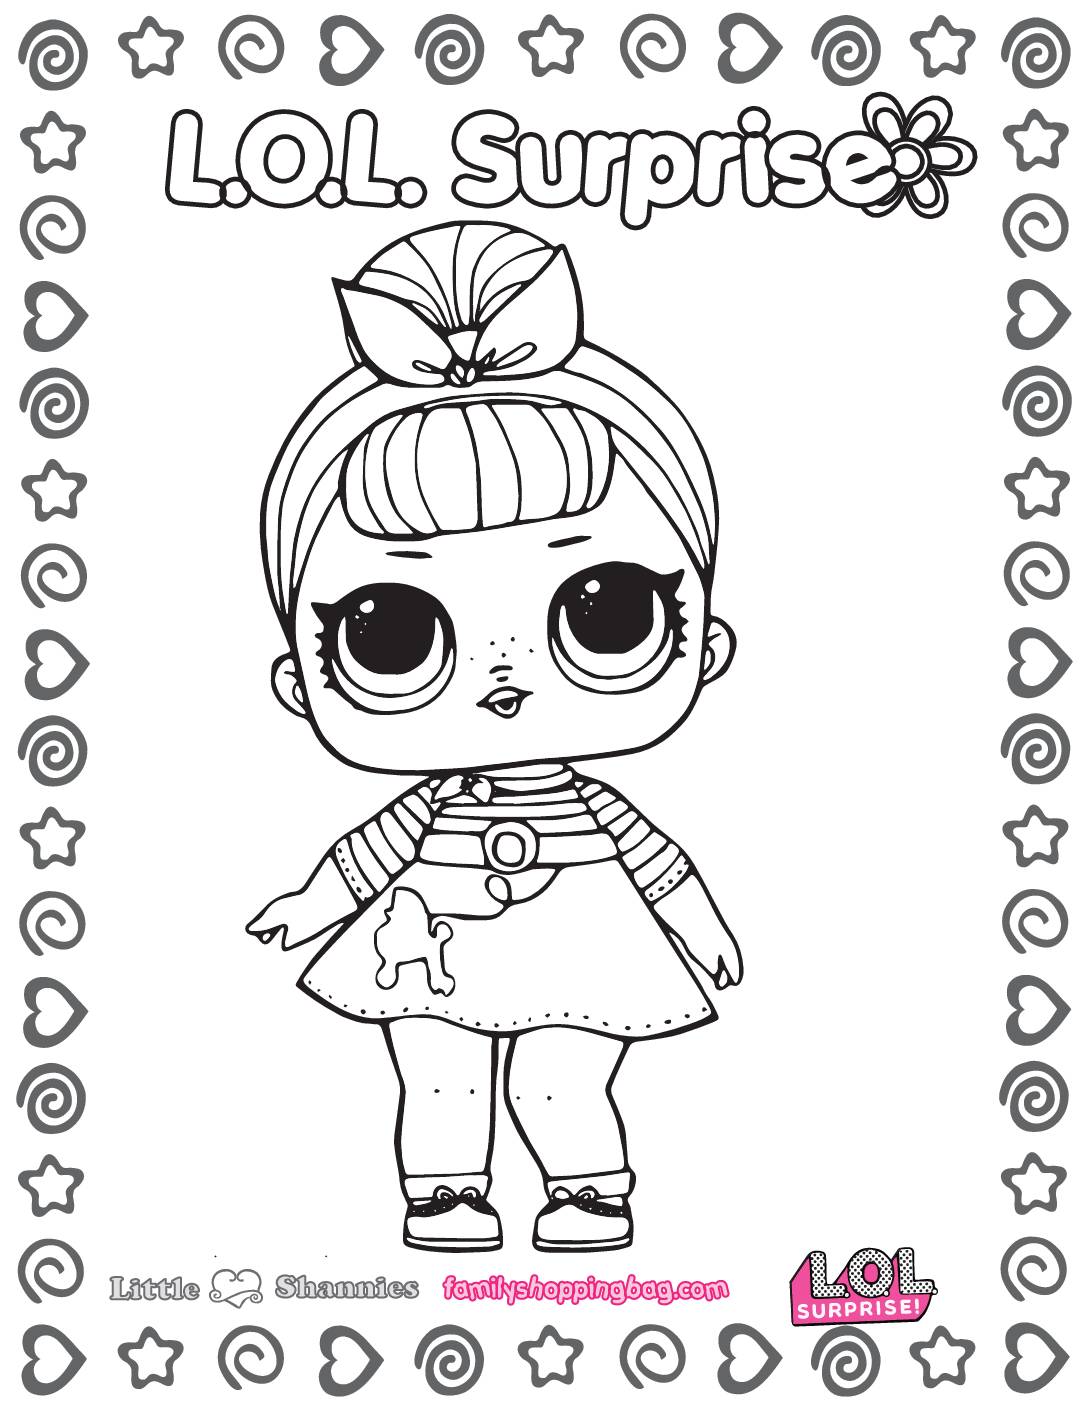 Lol Surprise Coloring Page 3 Coloring Pages